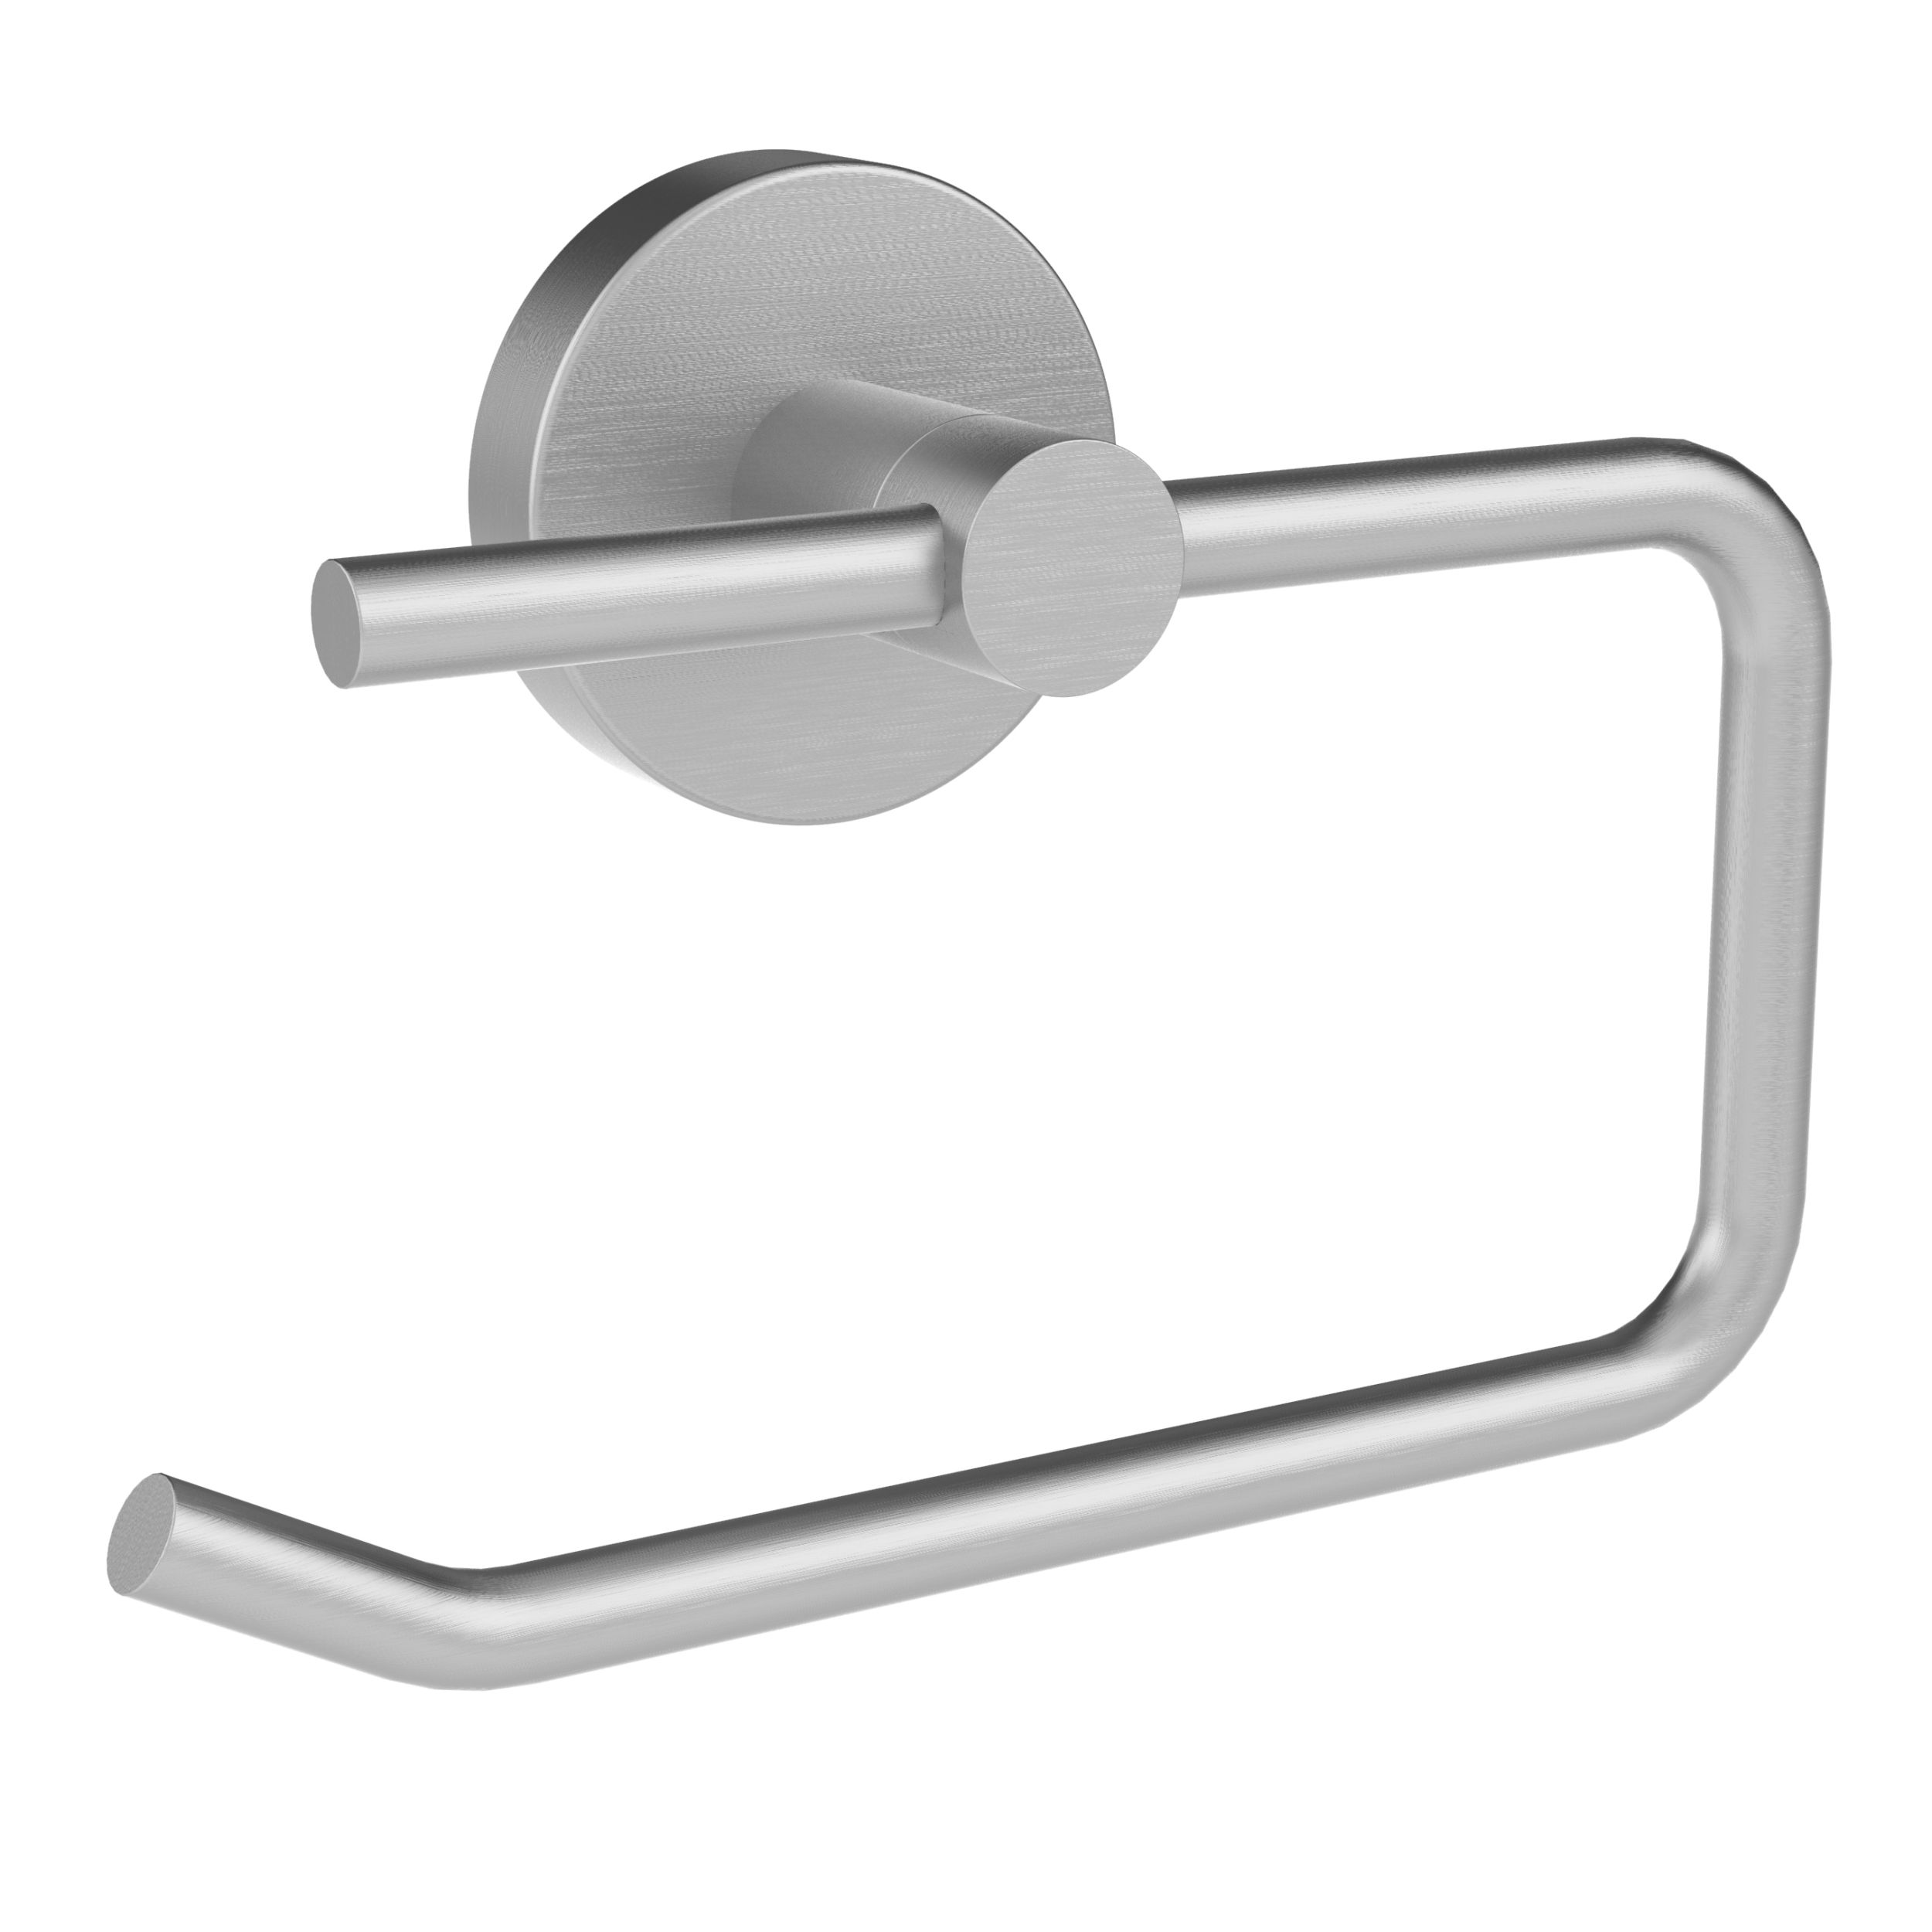  Toilet roll holder without cover plate